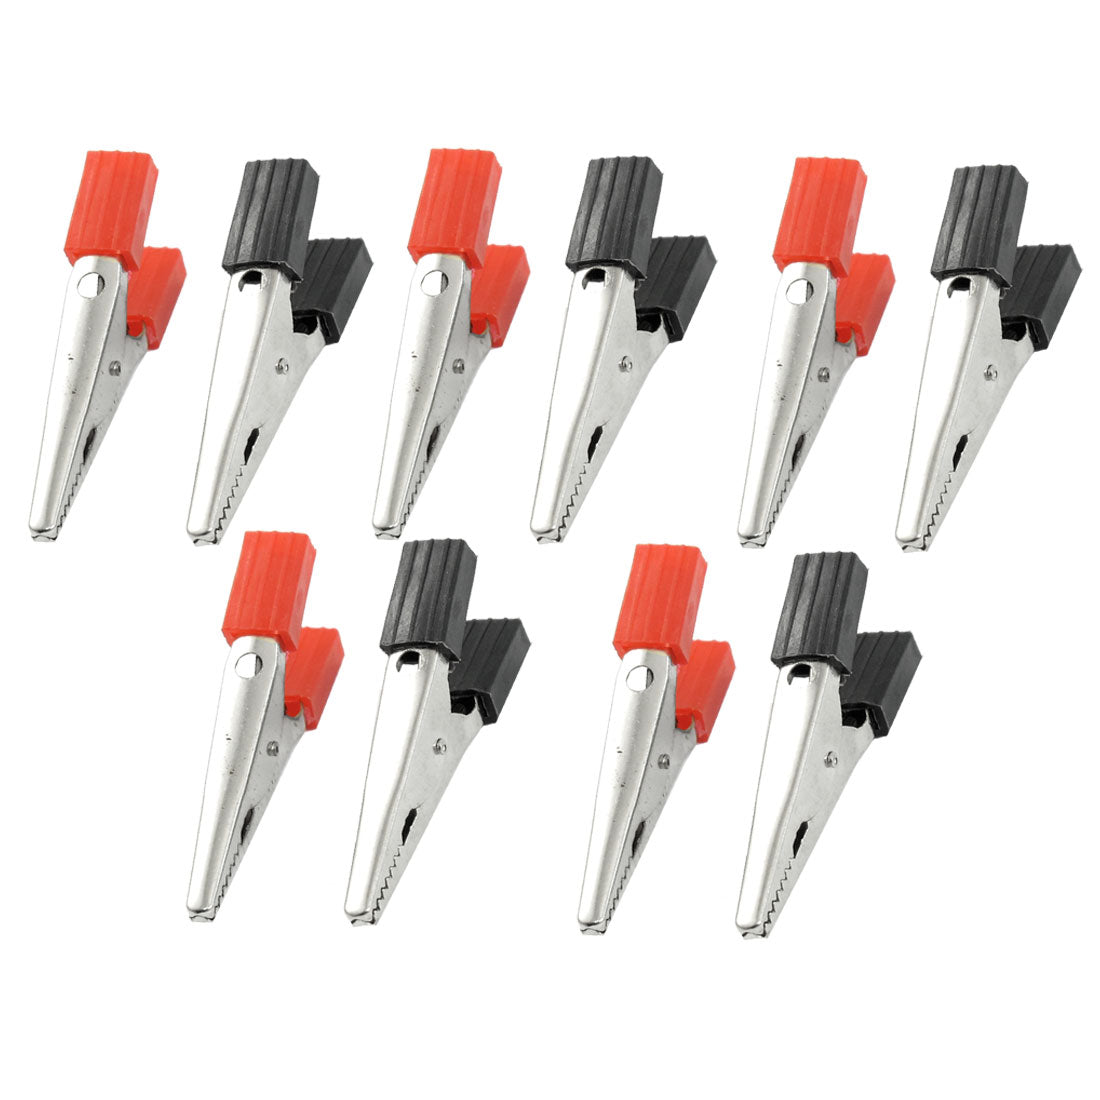 uxcell Uxcell 10 Pcs Insulated Alligator Clips Test Clamp Crocodile Clamps Black Red 1.8"